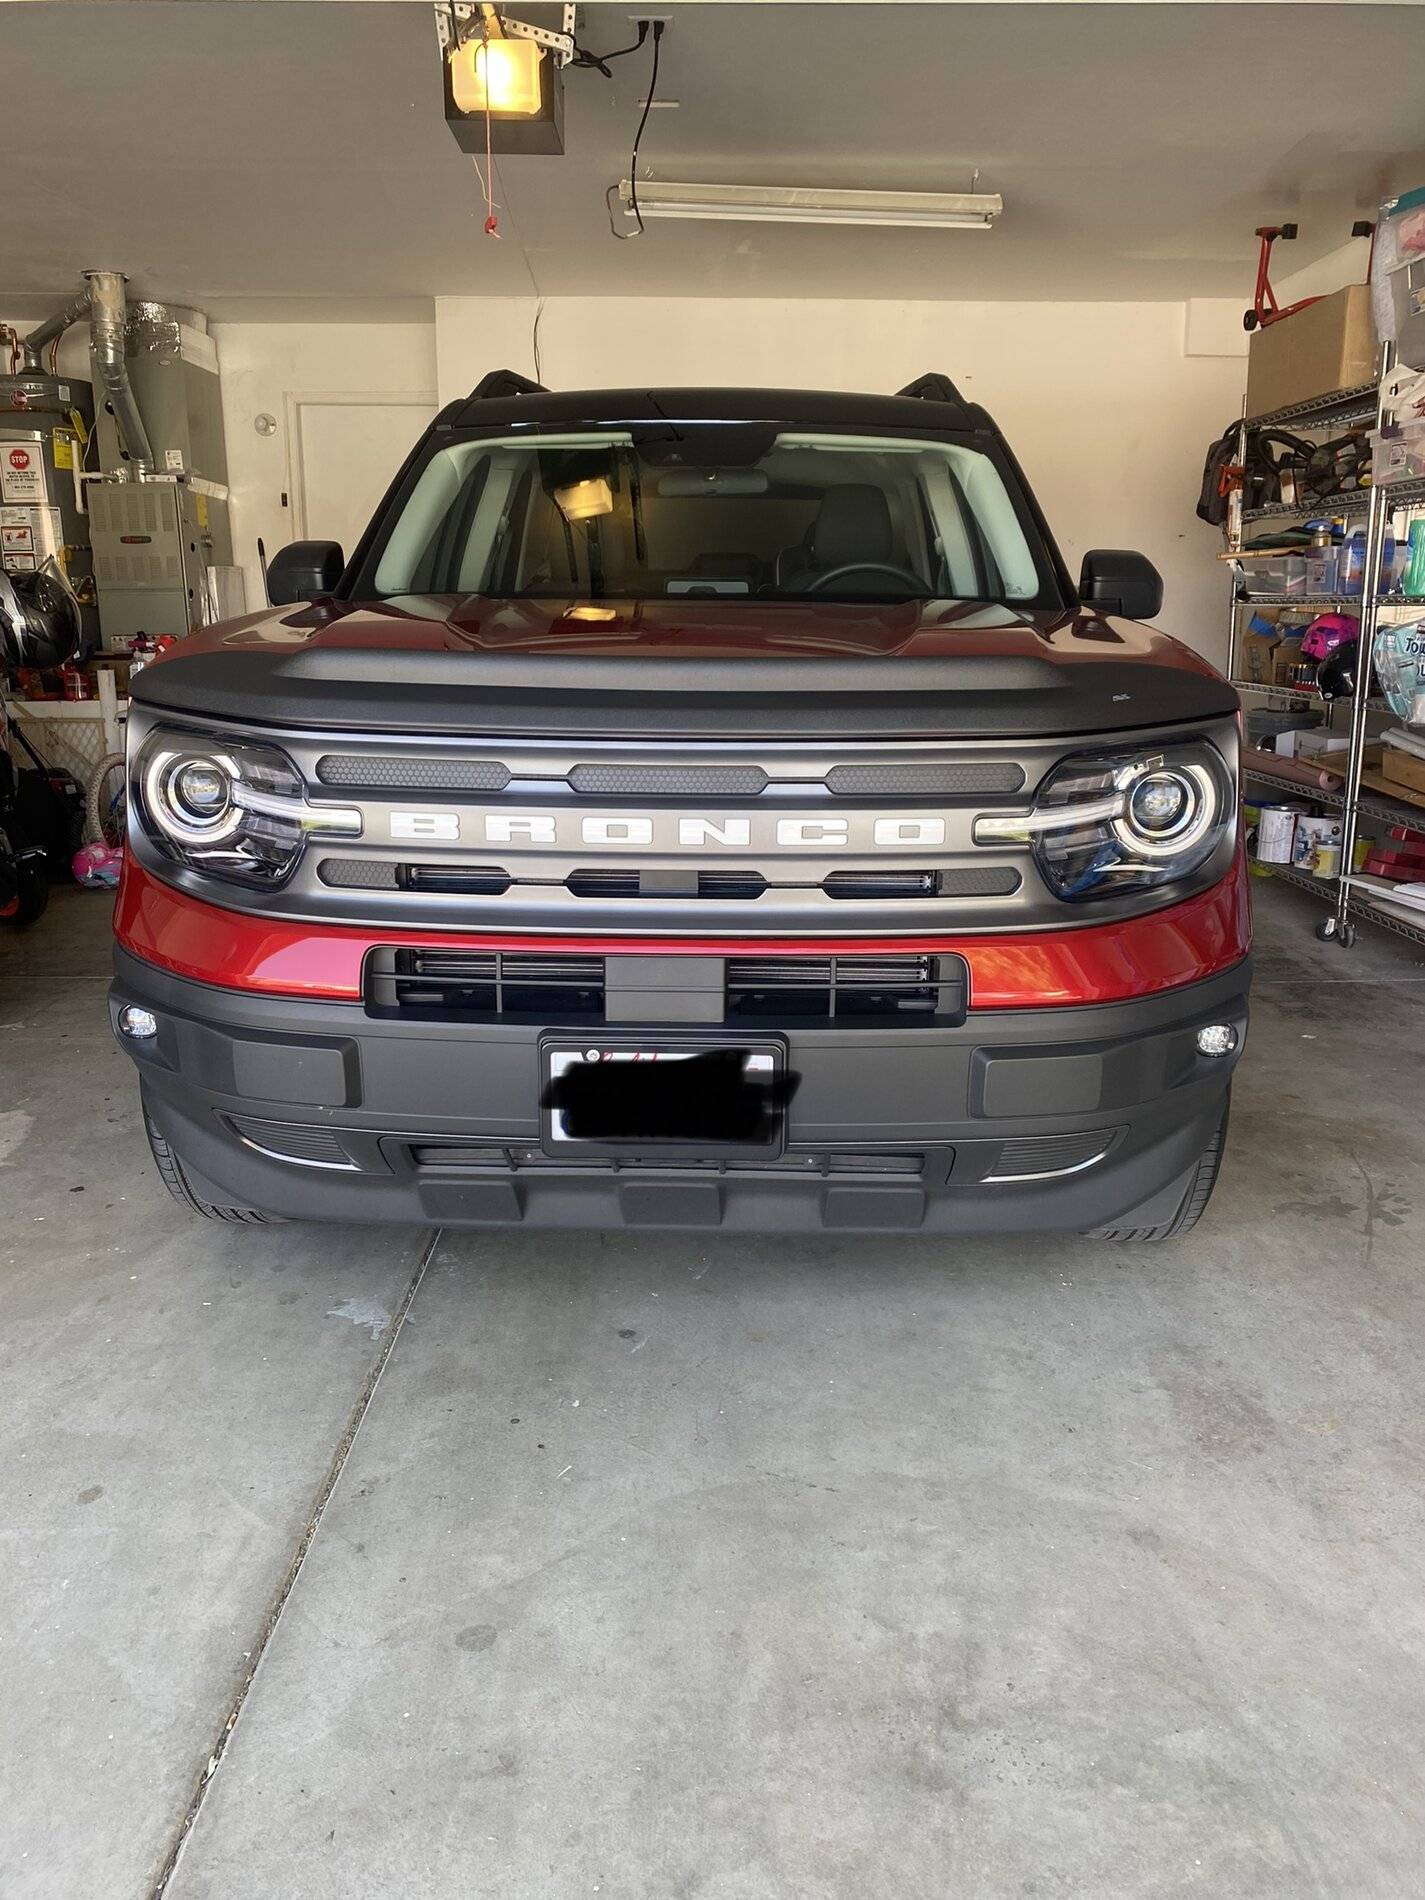 AEROSKIN II deflectors are they worth it? Page 2 2021+ Ford Bronco